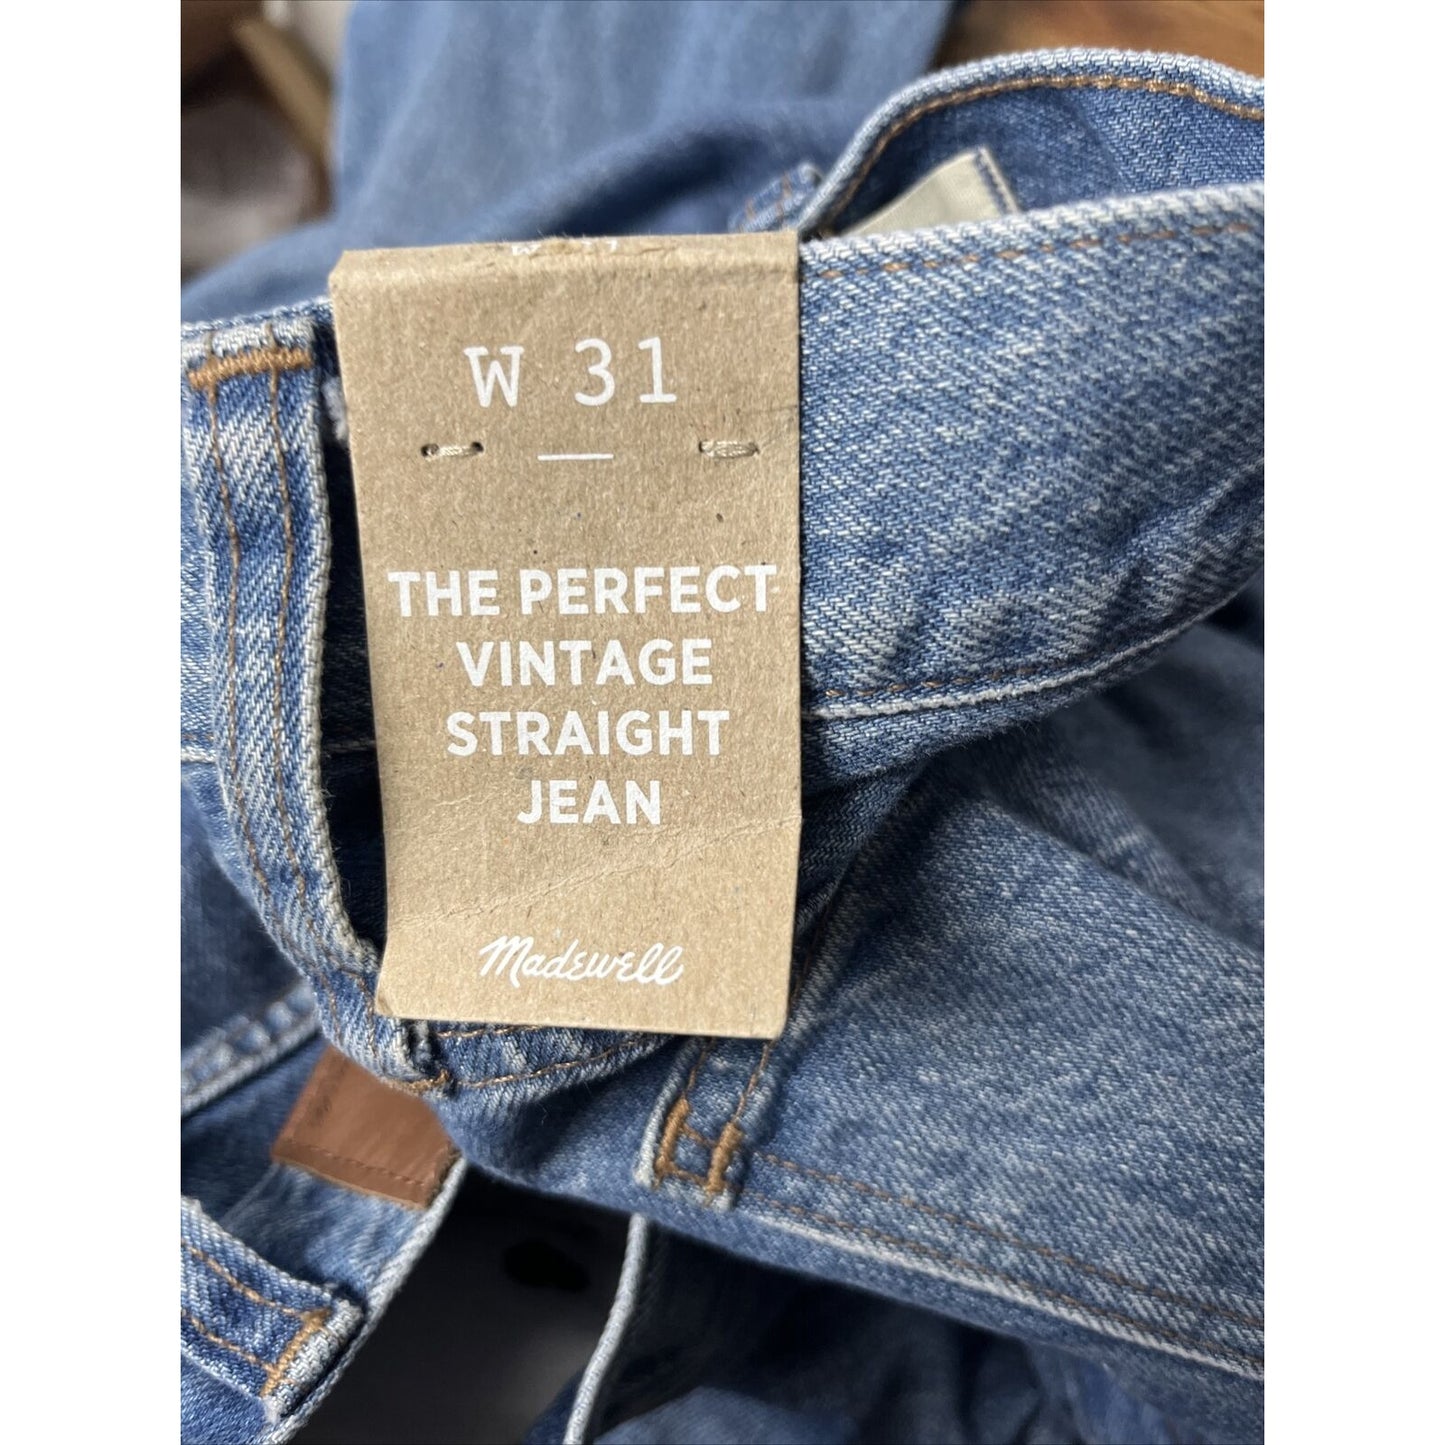 MADEWELL The Perfect Vintage Straight High Waist Jeans in Moultrie Wash Size 31